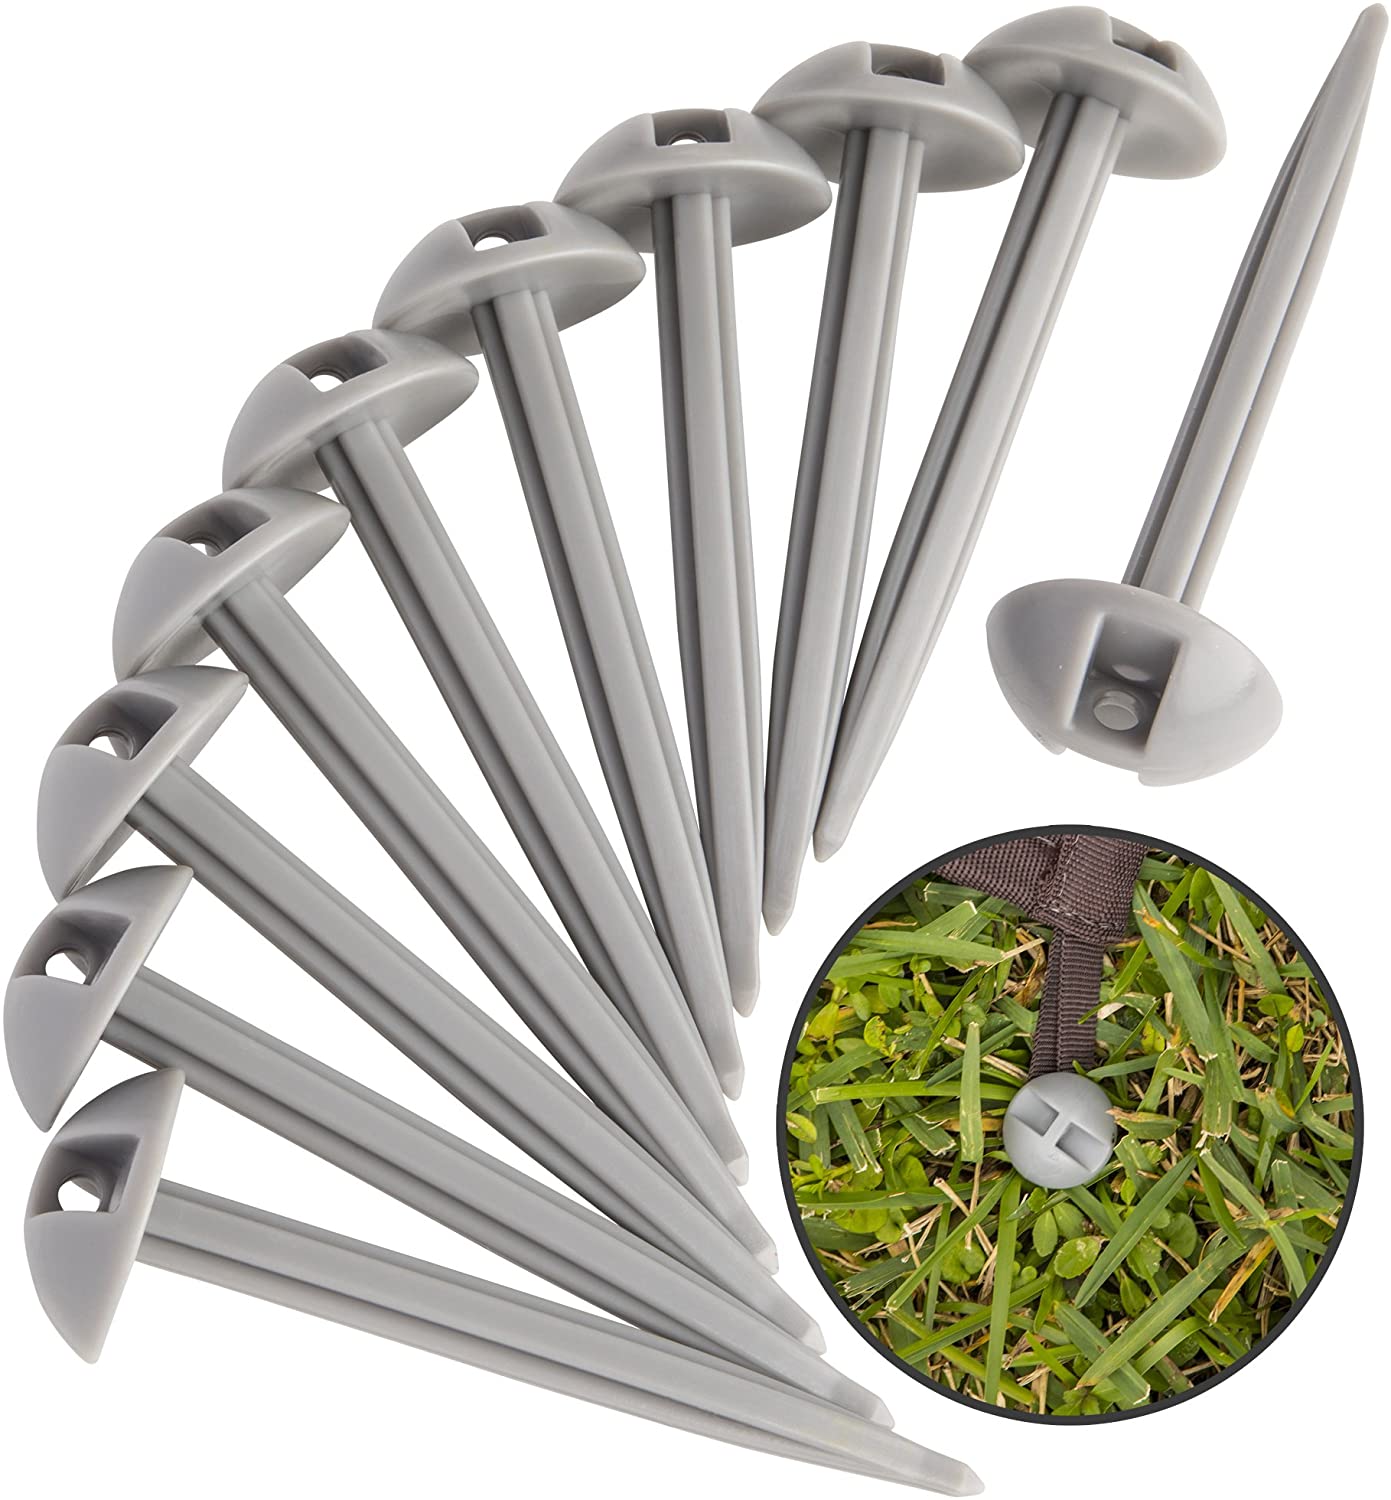 AdvenGO 10 Strong Polypropylene Stake Set for Grass, Soil - Anchoring Blankets, Patio Rugs, Camping Tents, Tarps, and RV Mats - Easy to Use, Outdoor Lawn and Garden Stakes - (Silver) (Silver)